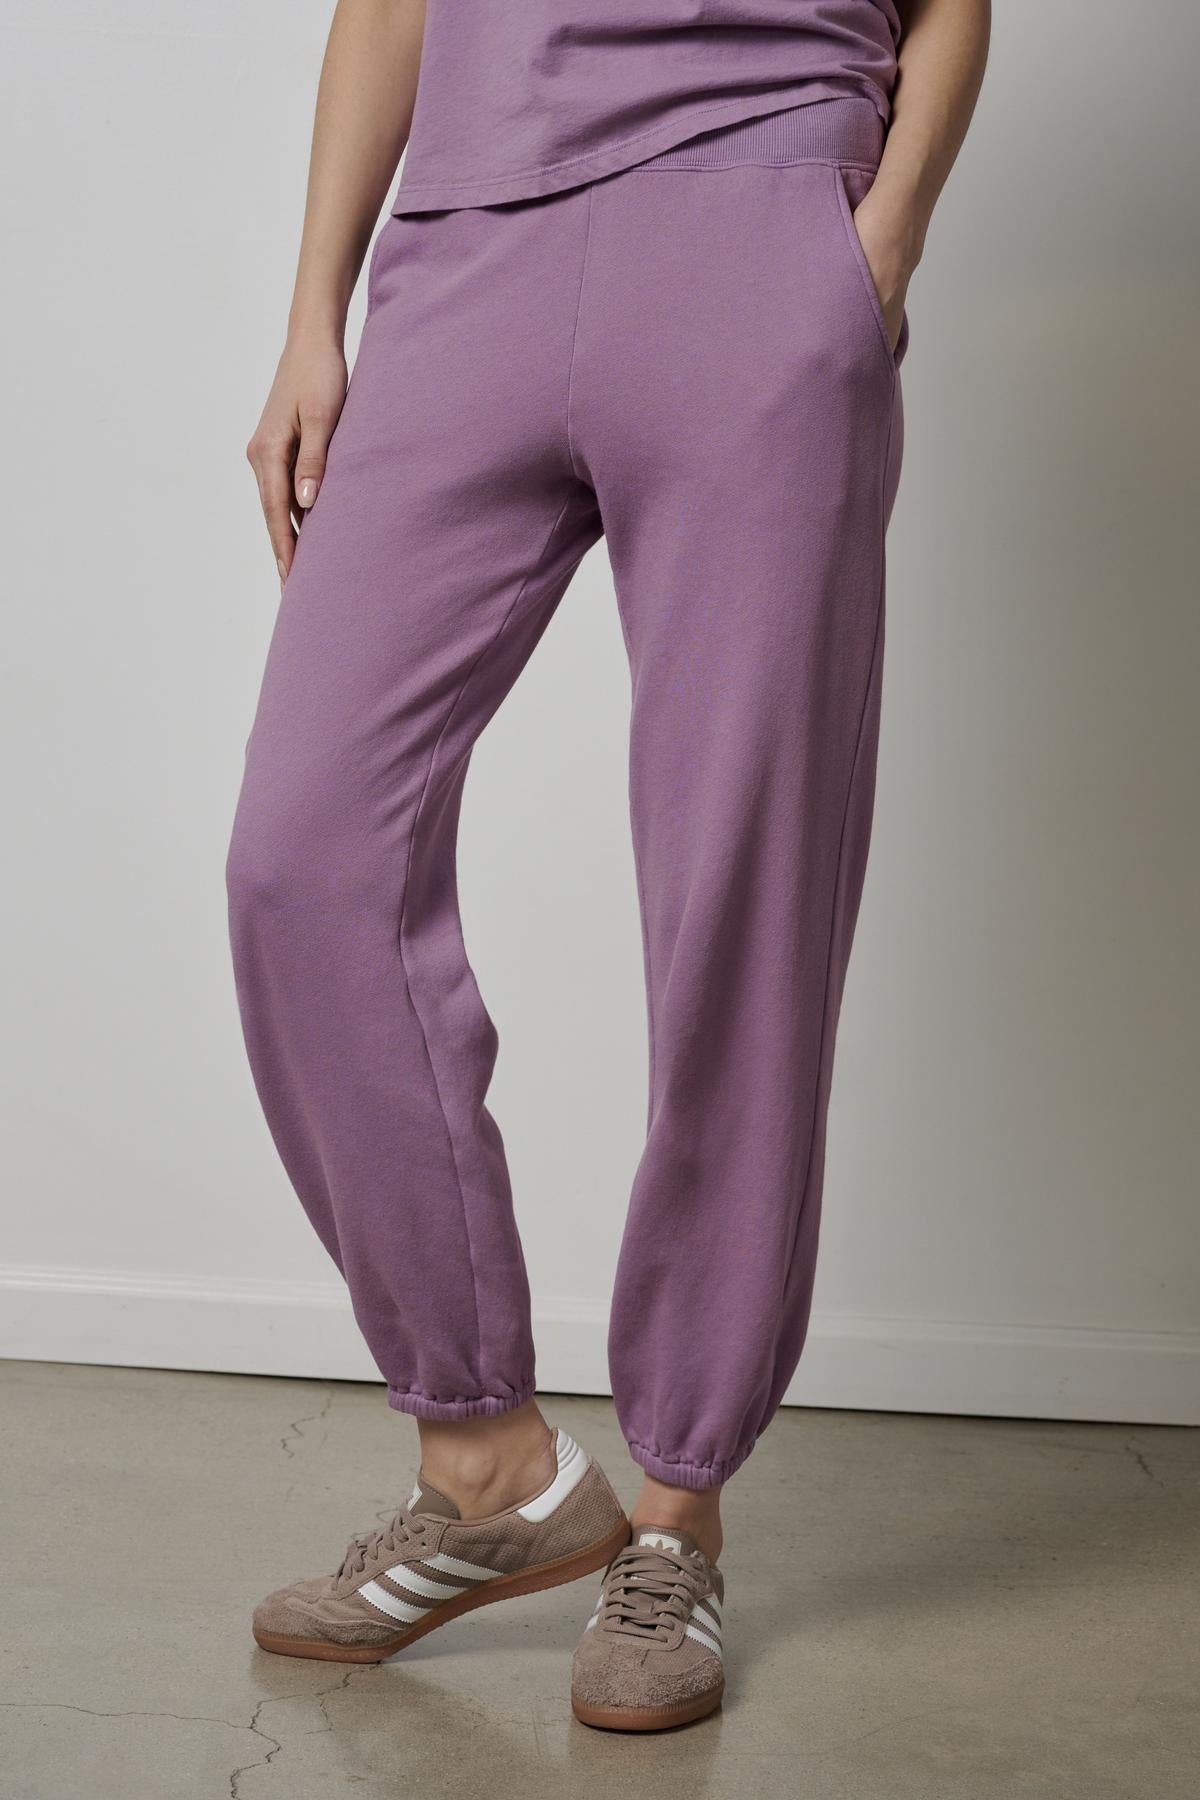 A woman wearing a ZUMA SWEATPANT by Velvet by Jenny Graham and sneakers.-26827763613889